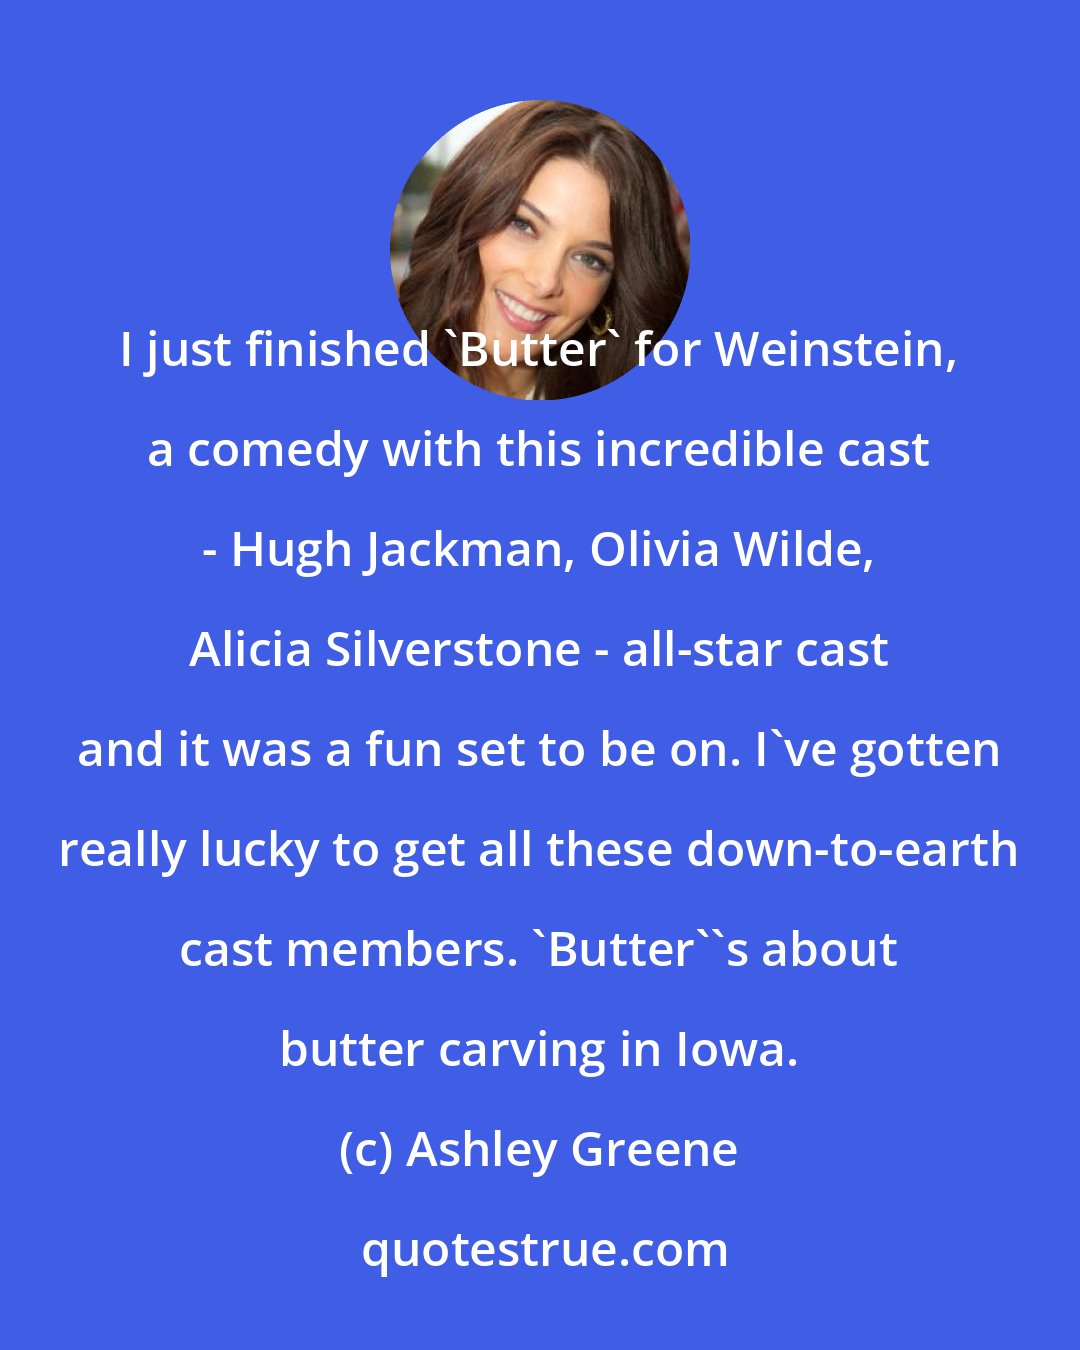 Ashley Greene: I just finished 'Butter' for Weinstein, a comedy with this incredible cast - Hugh Jackman, Olivia Wilde, Alicia Silverstone - all-star cast and it was a fun set to be on. I've gotten really lucky to get all these down-to-earth cast members. 'Butter''s about butter carving in Iowa.